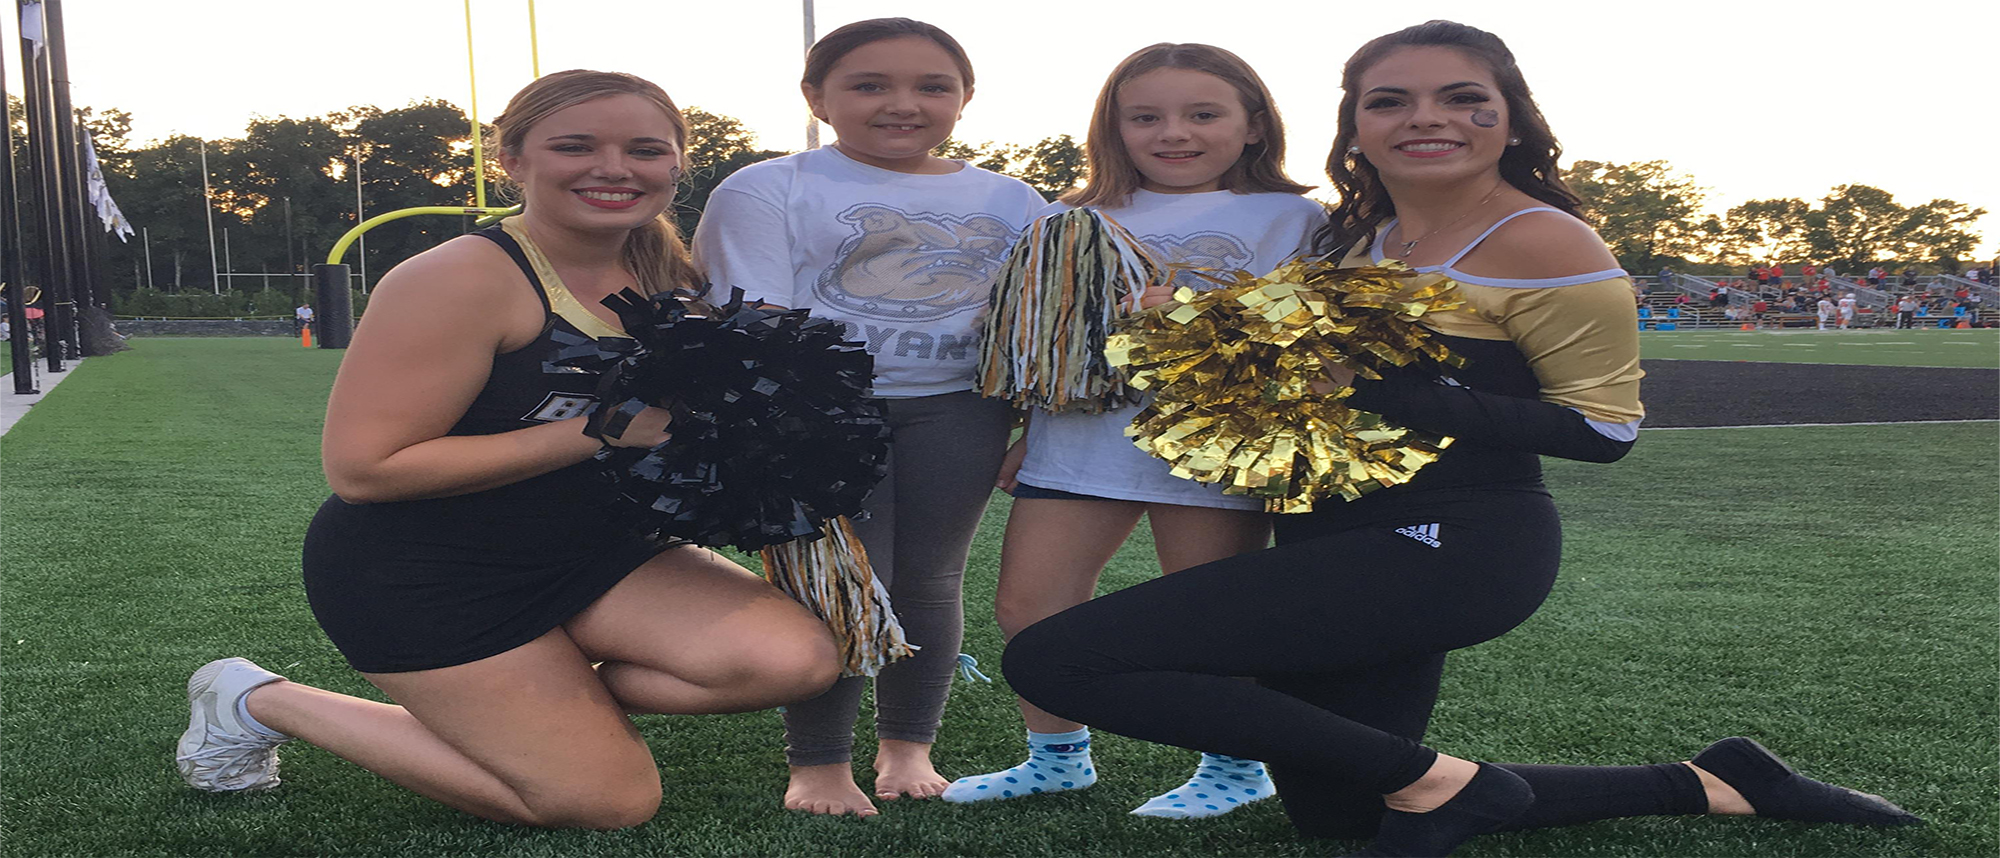 DANCE TEAM RECRUITS TWO ADORABLE NEW MEMBERS